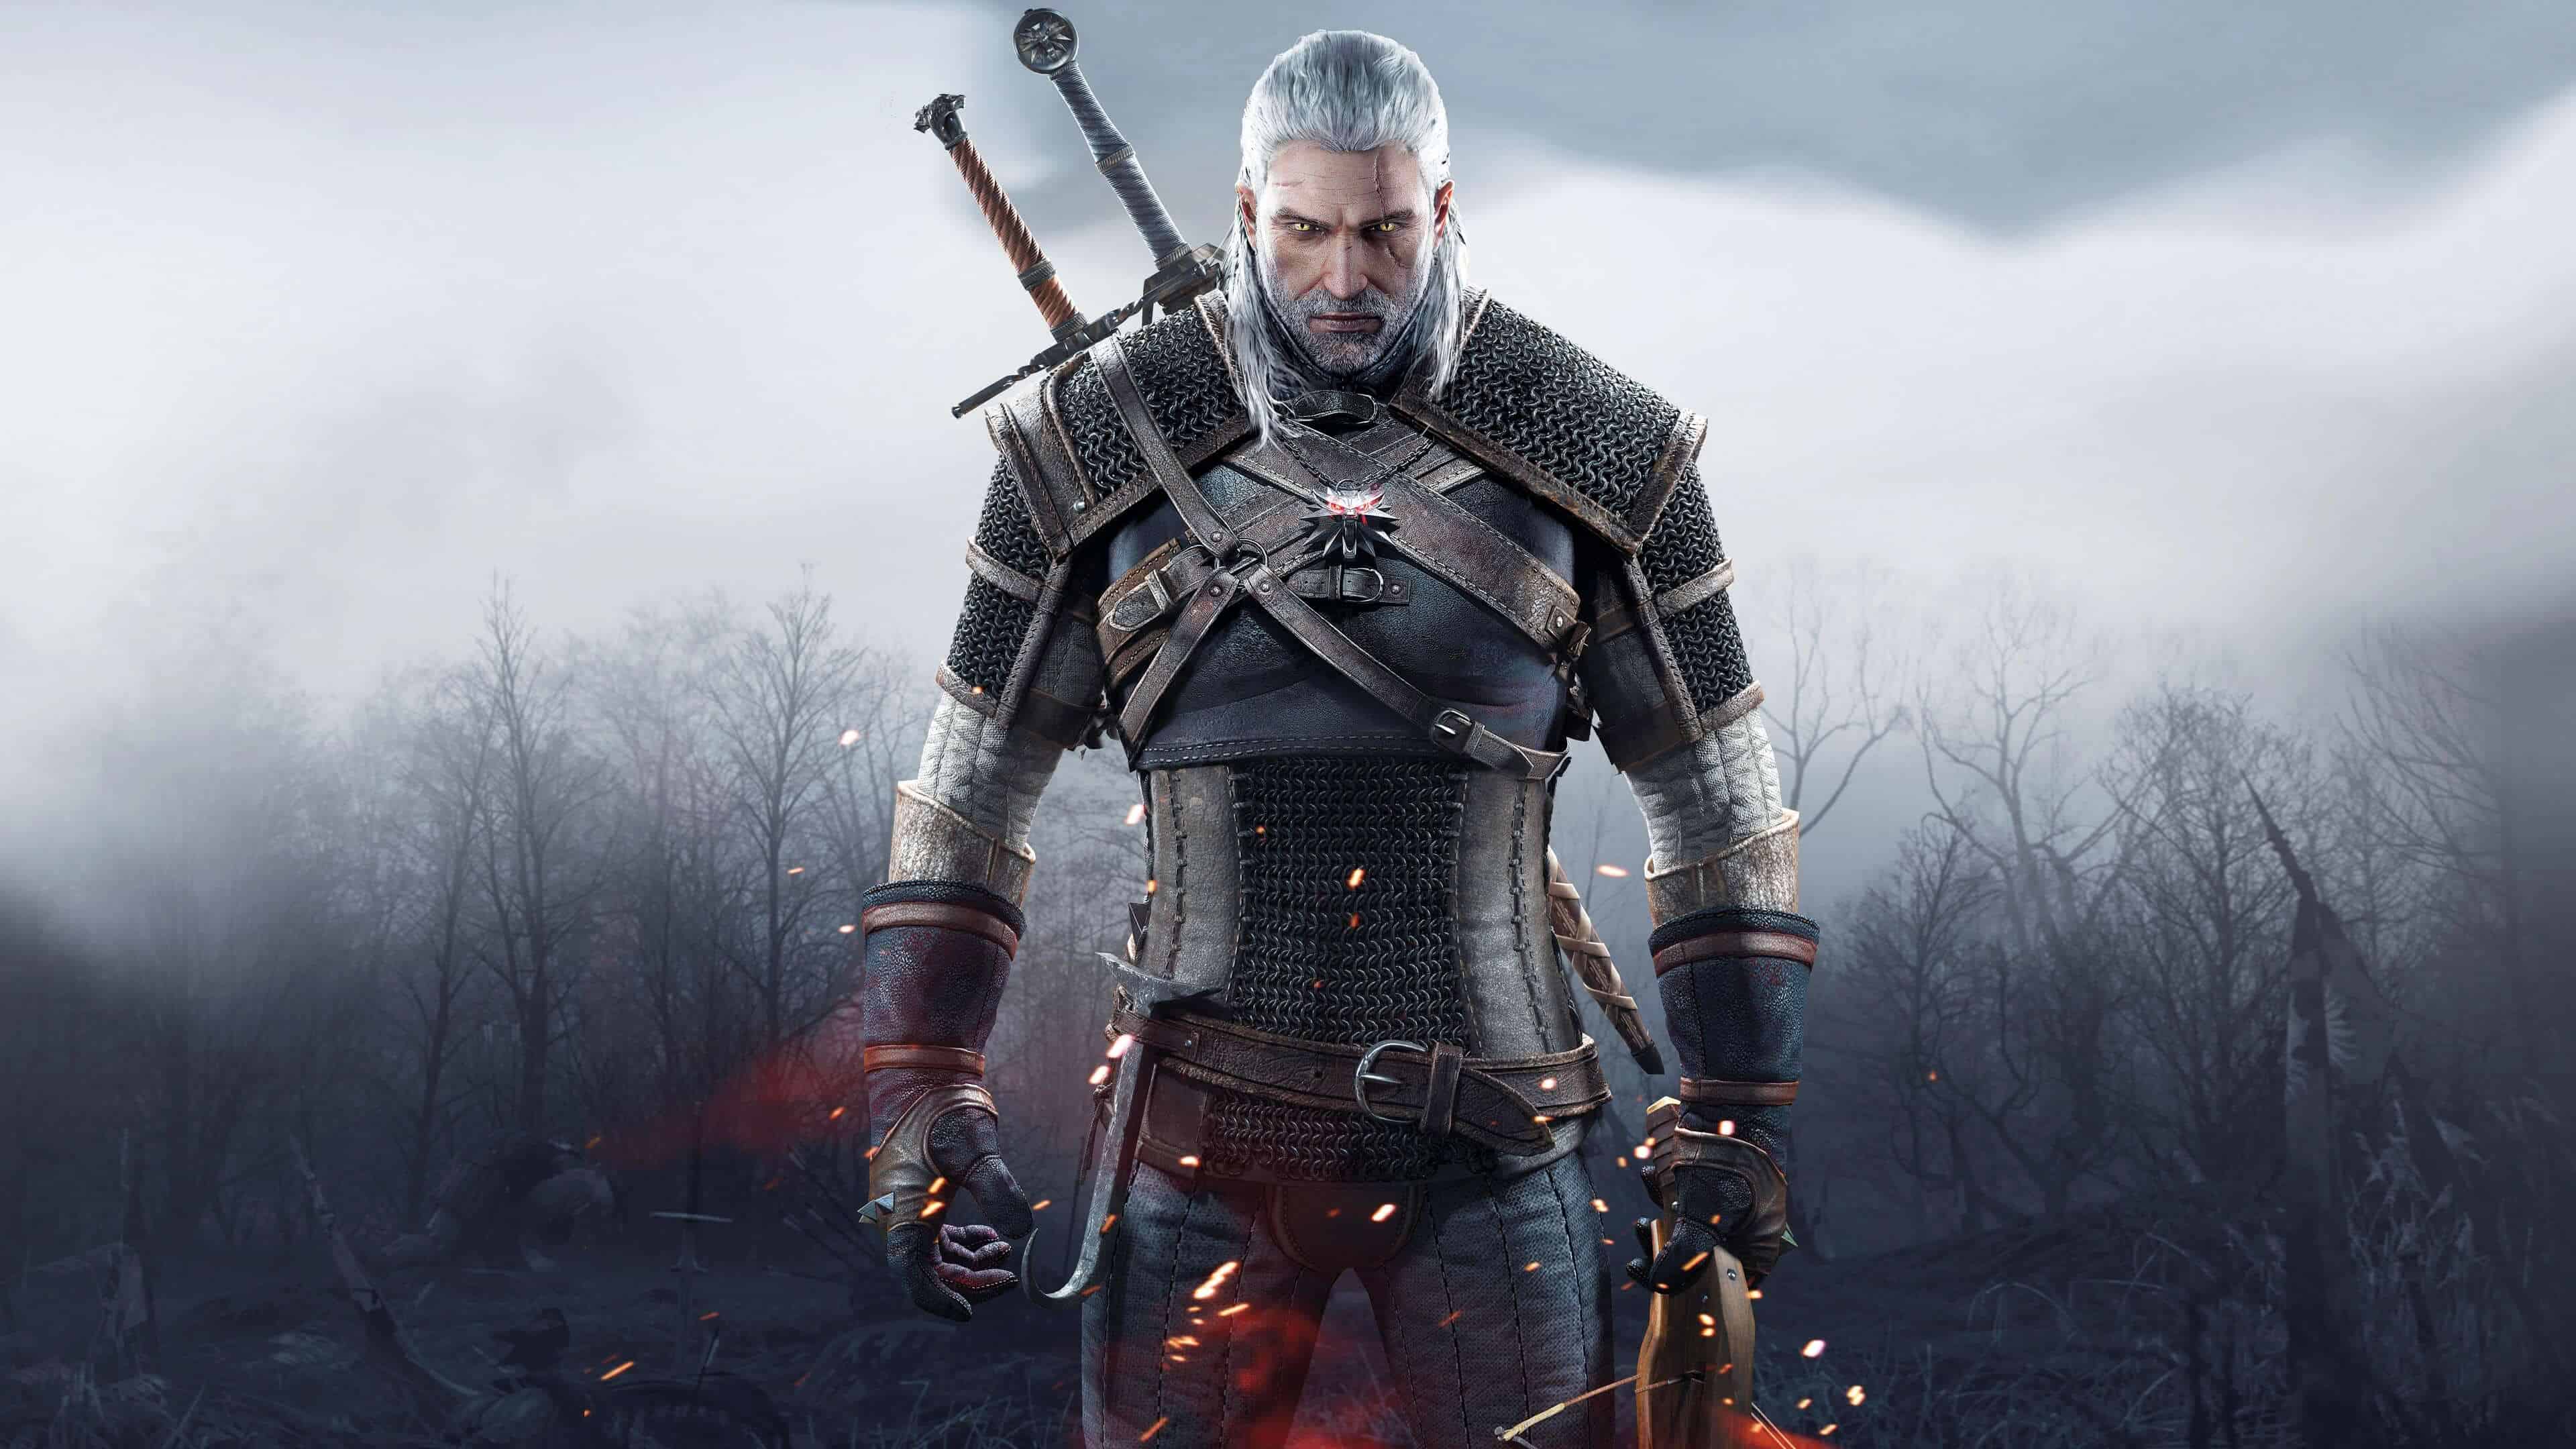 The Witcher  Henry Cavill wallpaper  HD Mobile Walls